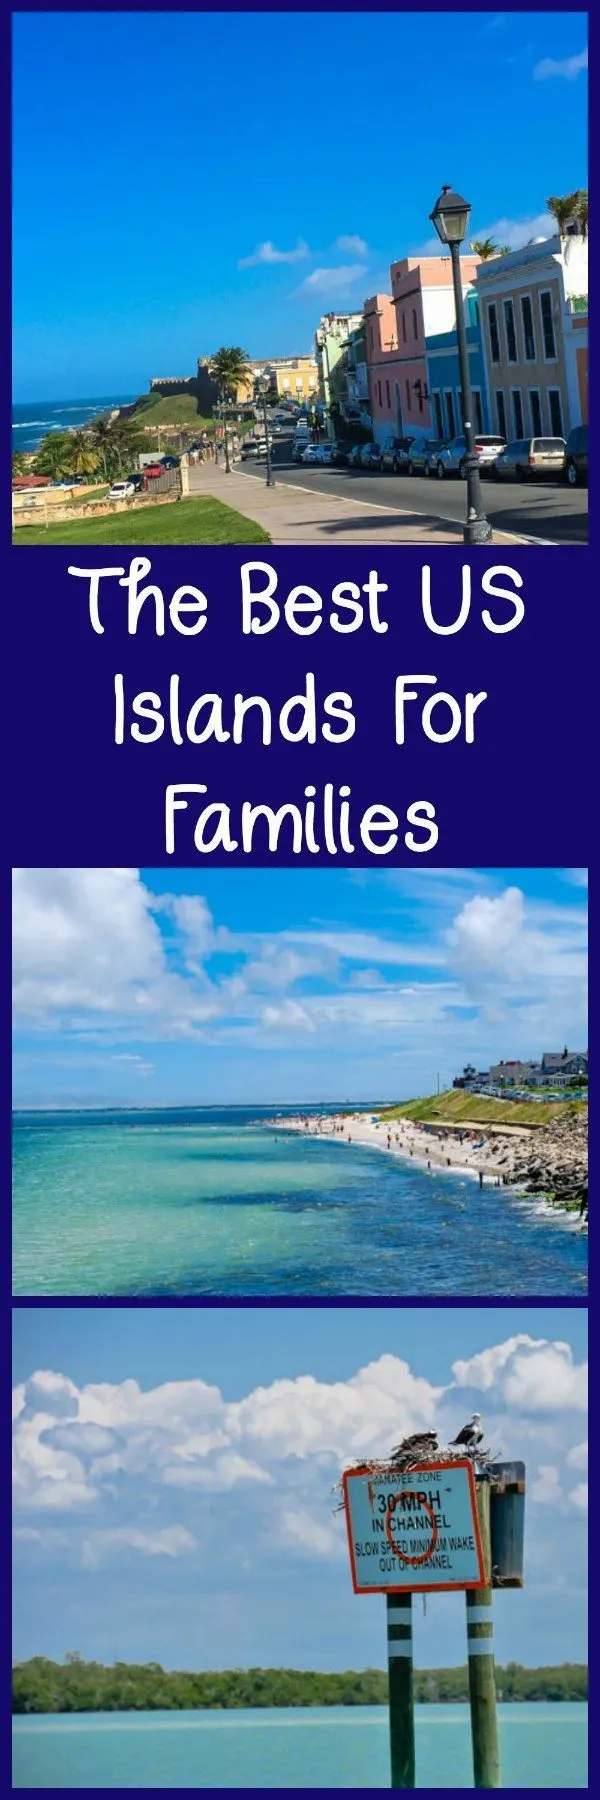 The Best US Islands for families, including islands in George (St Simons), Massachusetts (Martha's Vineyard), and South Carolina. 